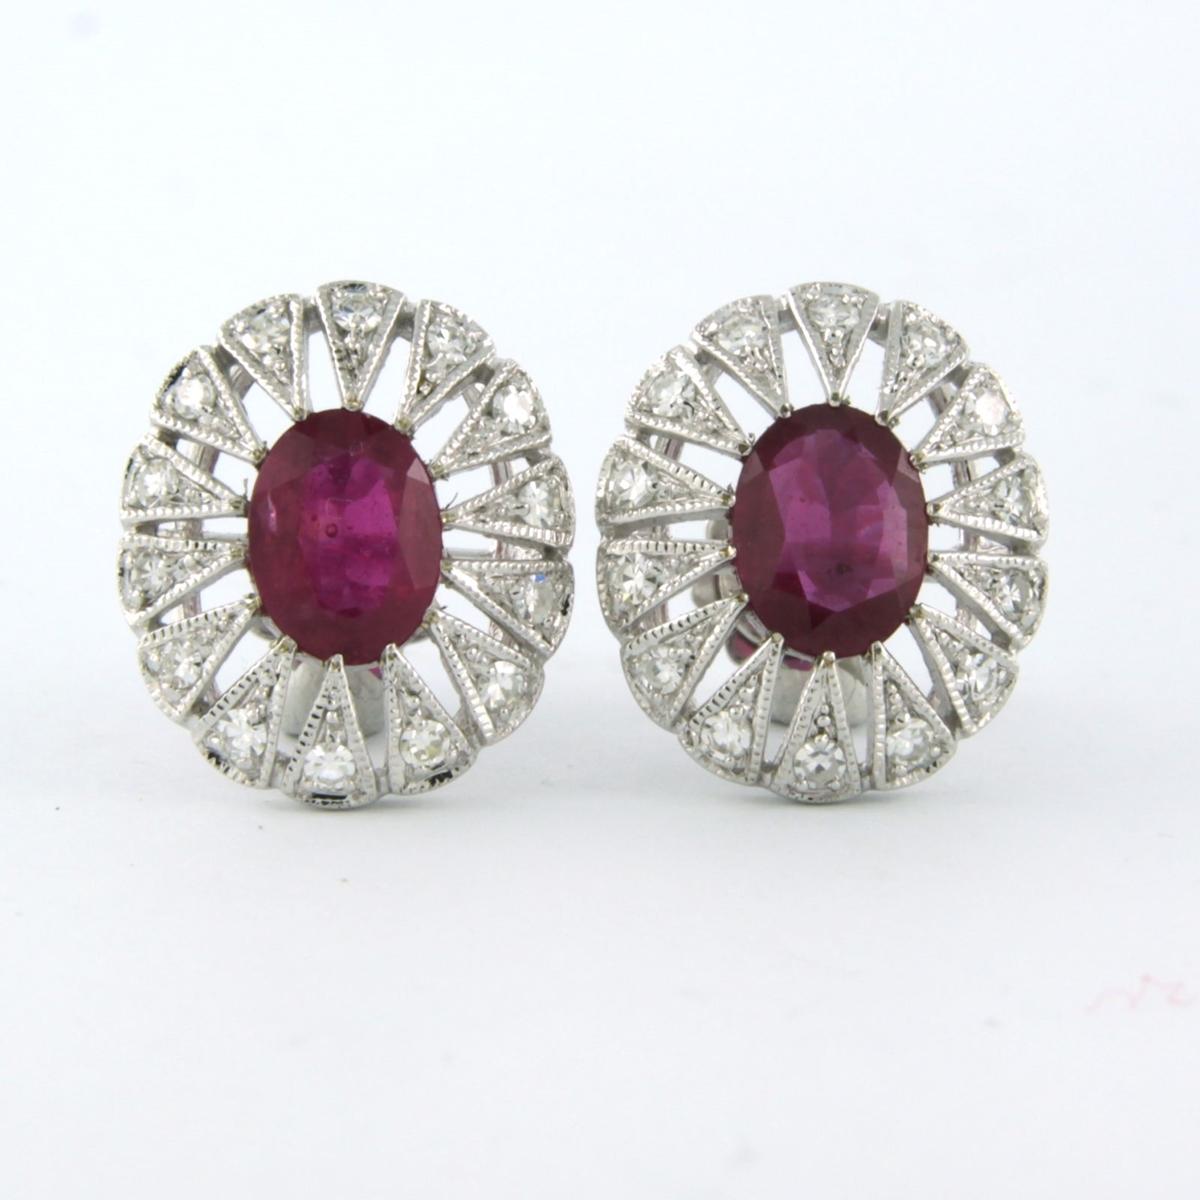 14 kt white gold earrings set with ruby 2.90 carat and single cut diamond total 0.48 carat - F/G - VS/SI

detailed description

The earrings are 1.4 cm wide and 1.7 cm high

weight: 5.5 grams

set with :

- 2 x 8.0 mm x 6.0 mm oval facet cut heated